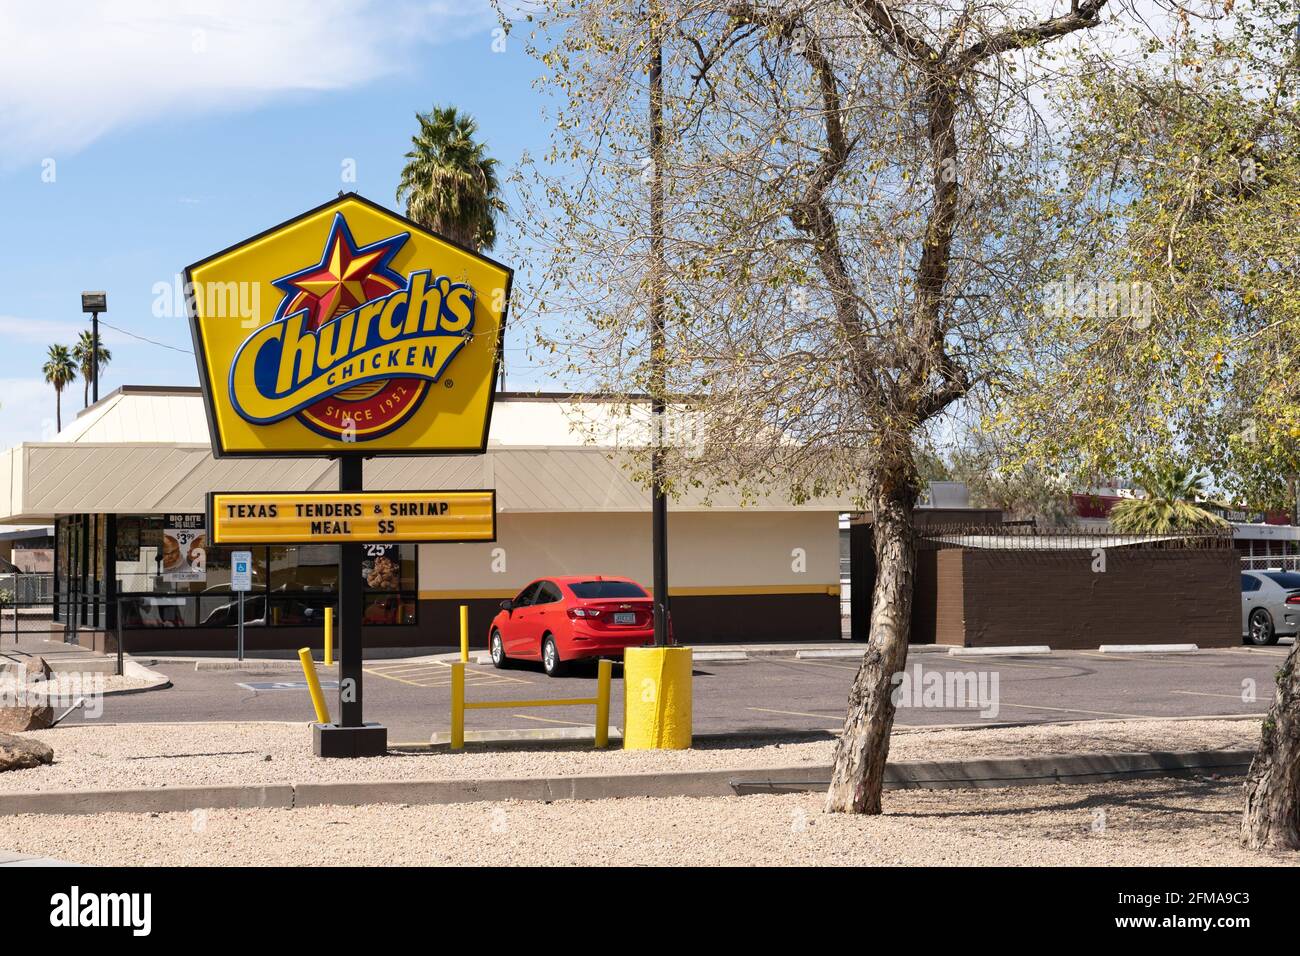 Phoenix, AZ - March 20, 2021: Church's Chicken is an American chain of fast food restaurants specializing in fried chicken Stock Photo